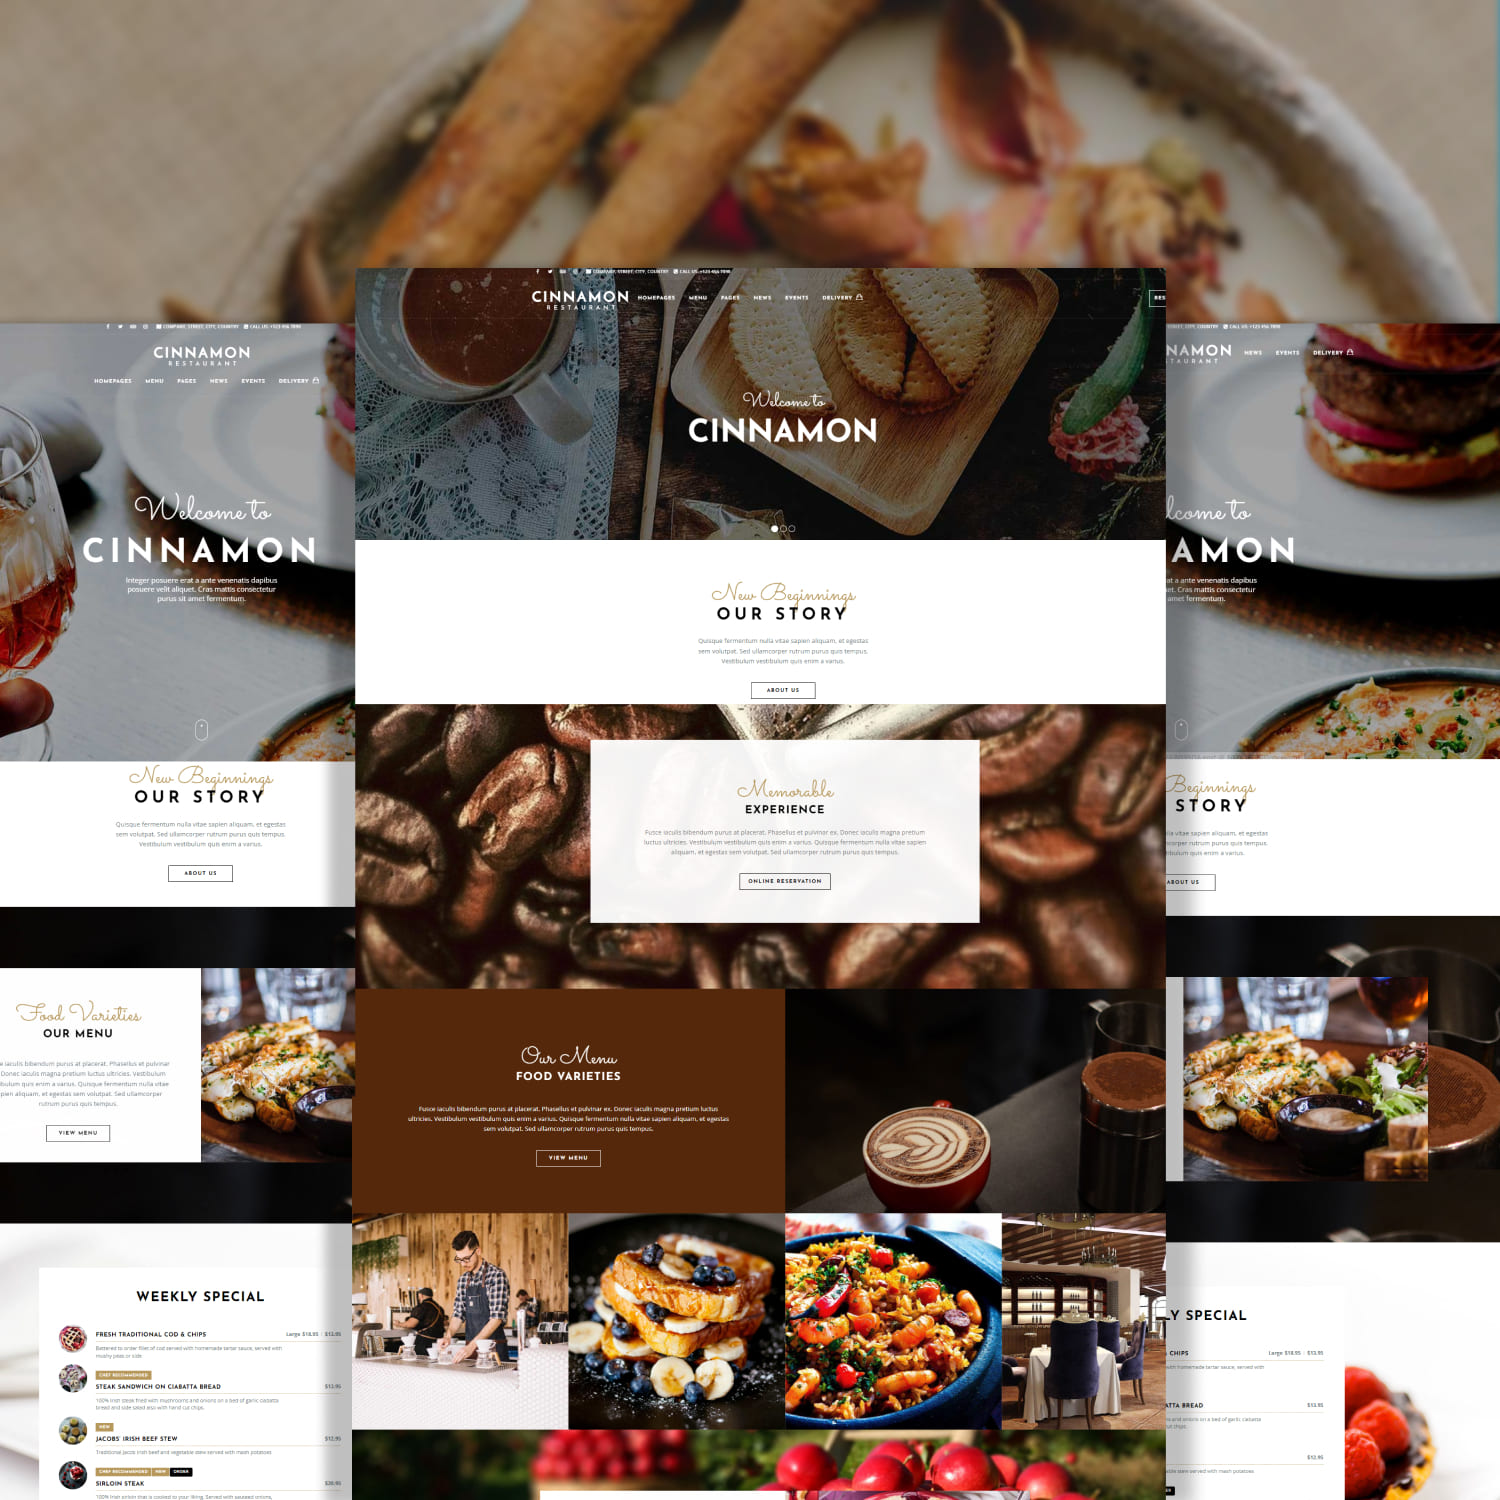 Cinnamon Restaurant Theme for WordPress can also be used to create a One Page restaurant website.